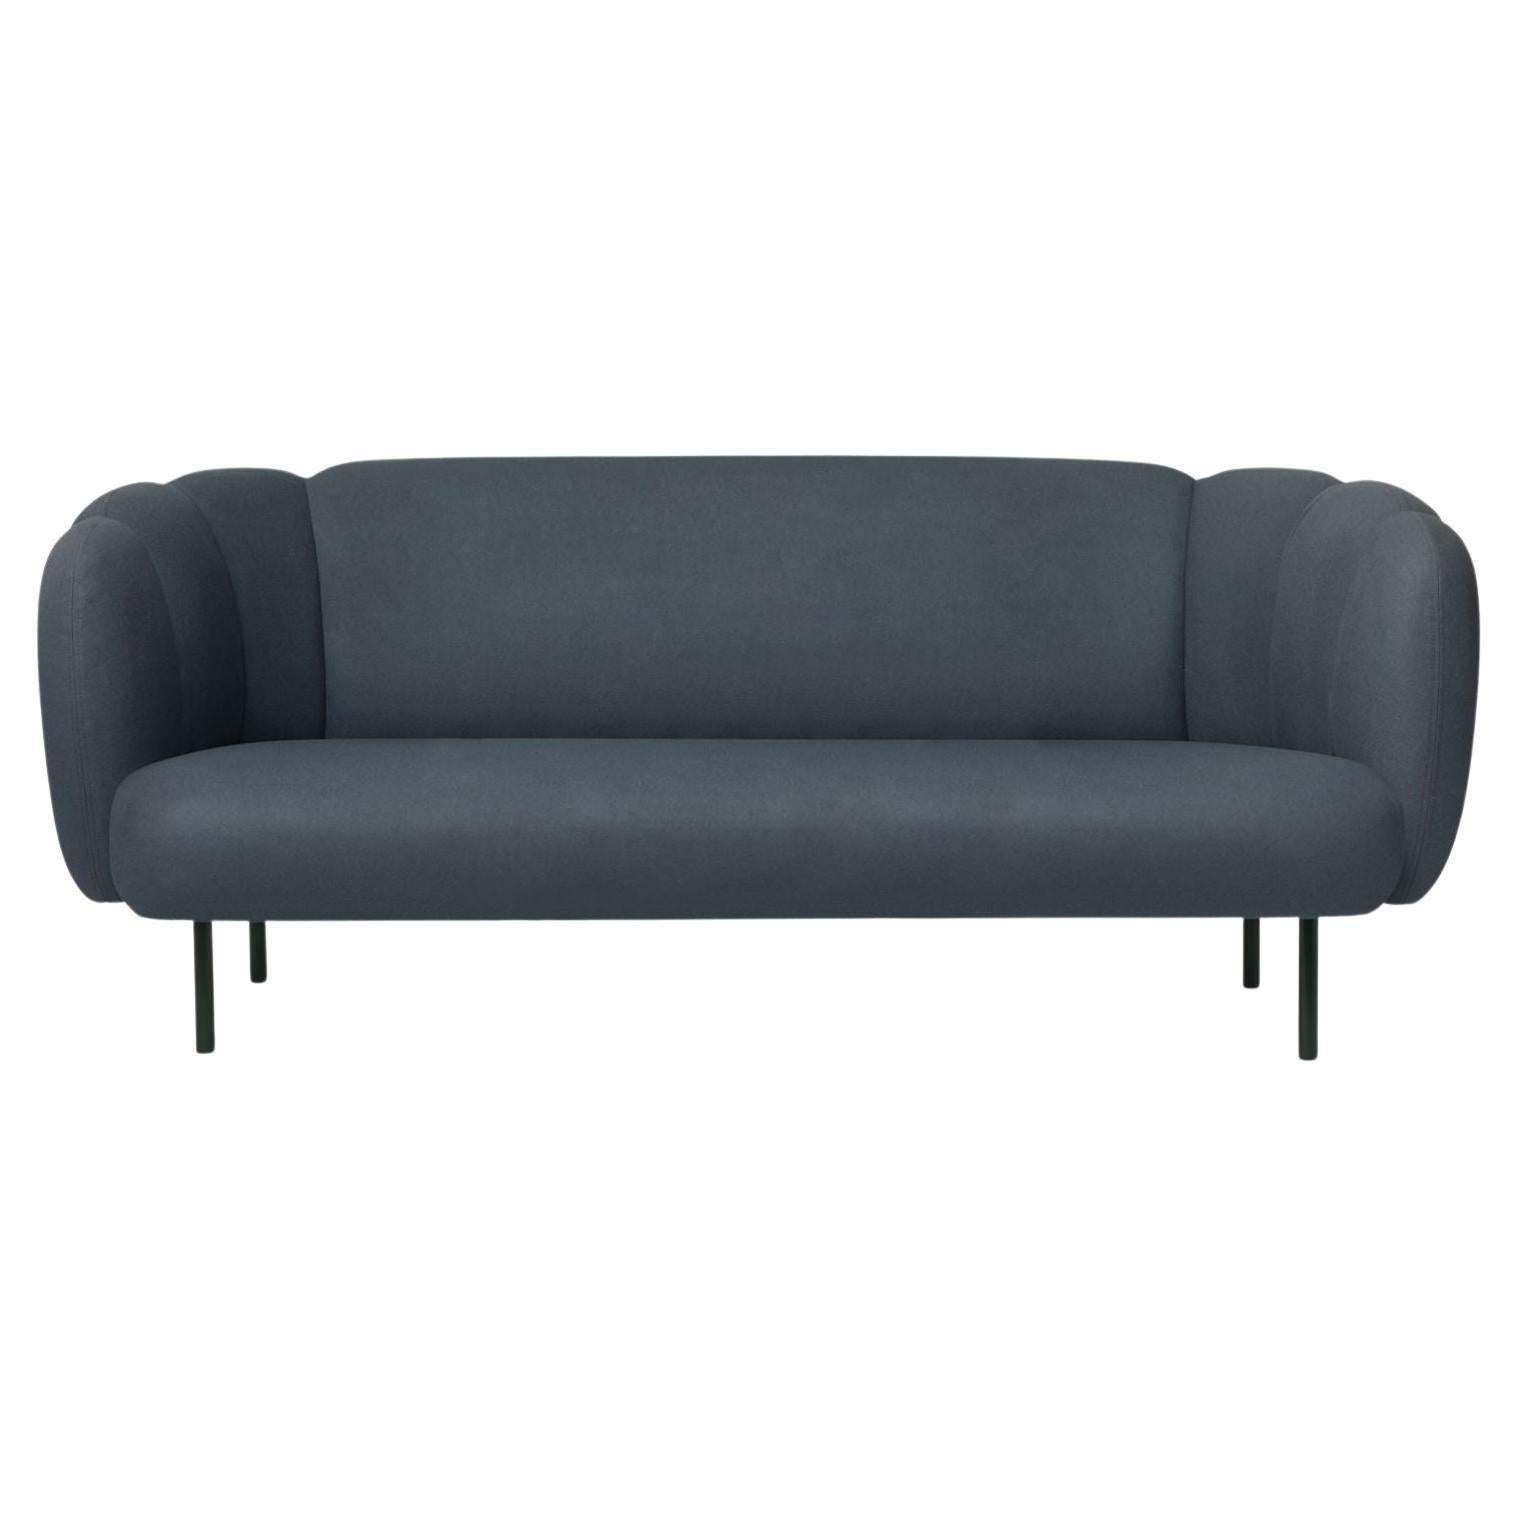 Caper 3 Seater with Stitches Petrol by Warm Nordic